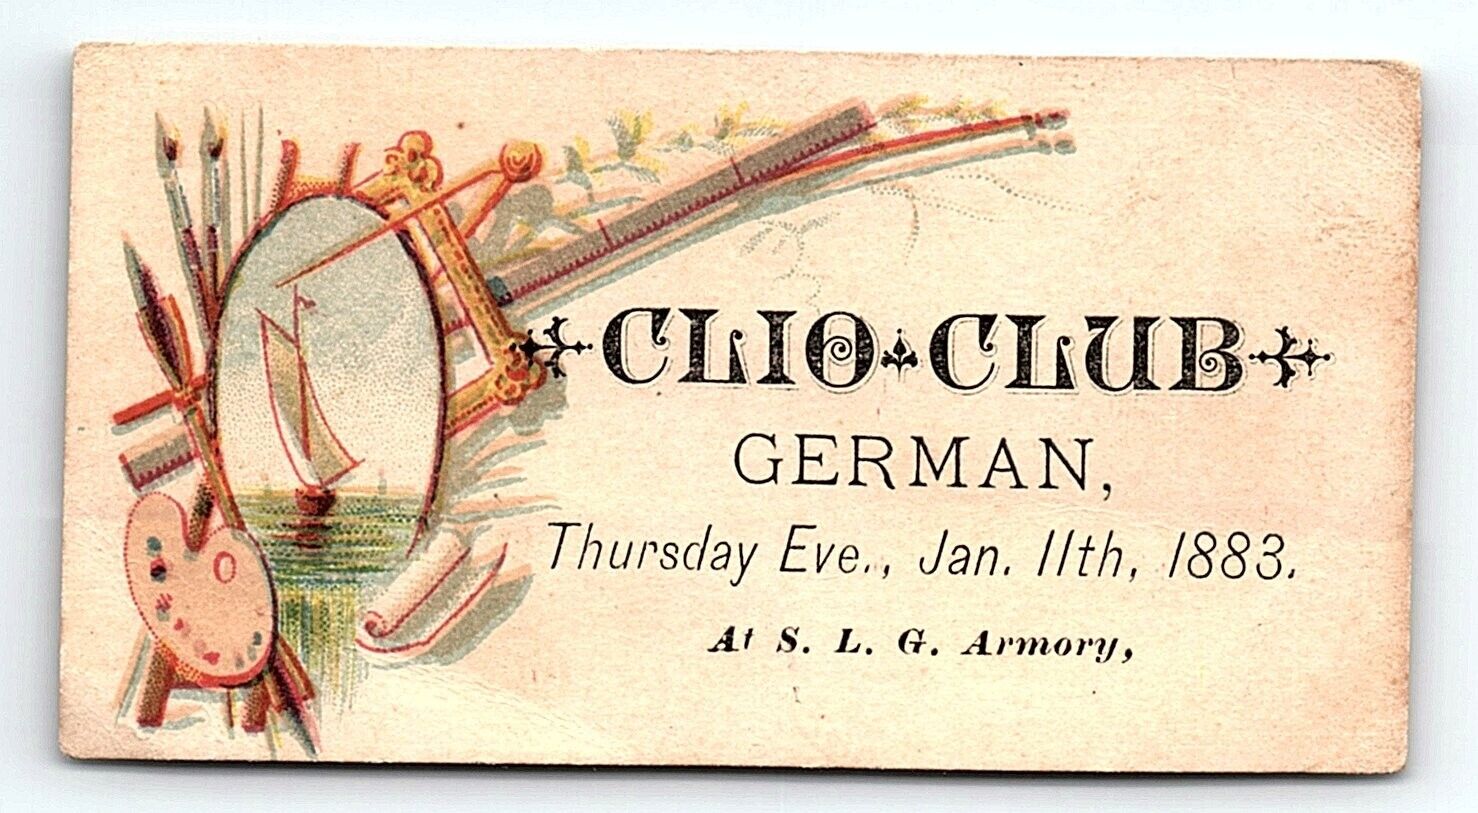 1883 CLIO CLUB GERMAN AT S.L.G. ARMORY VICTORIAN TRADE CARD Z1125